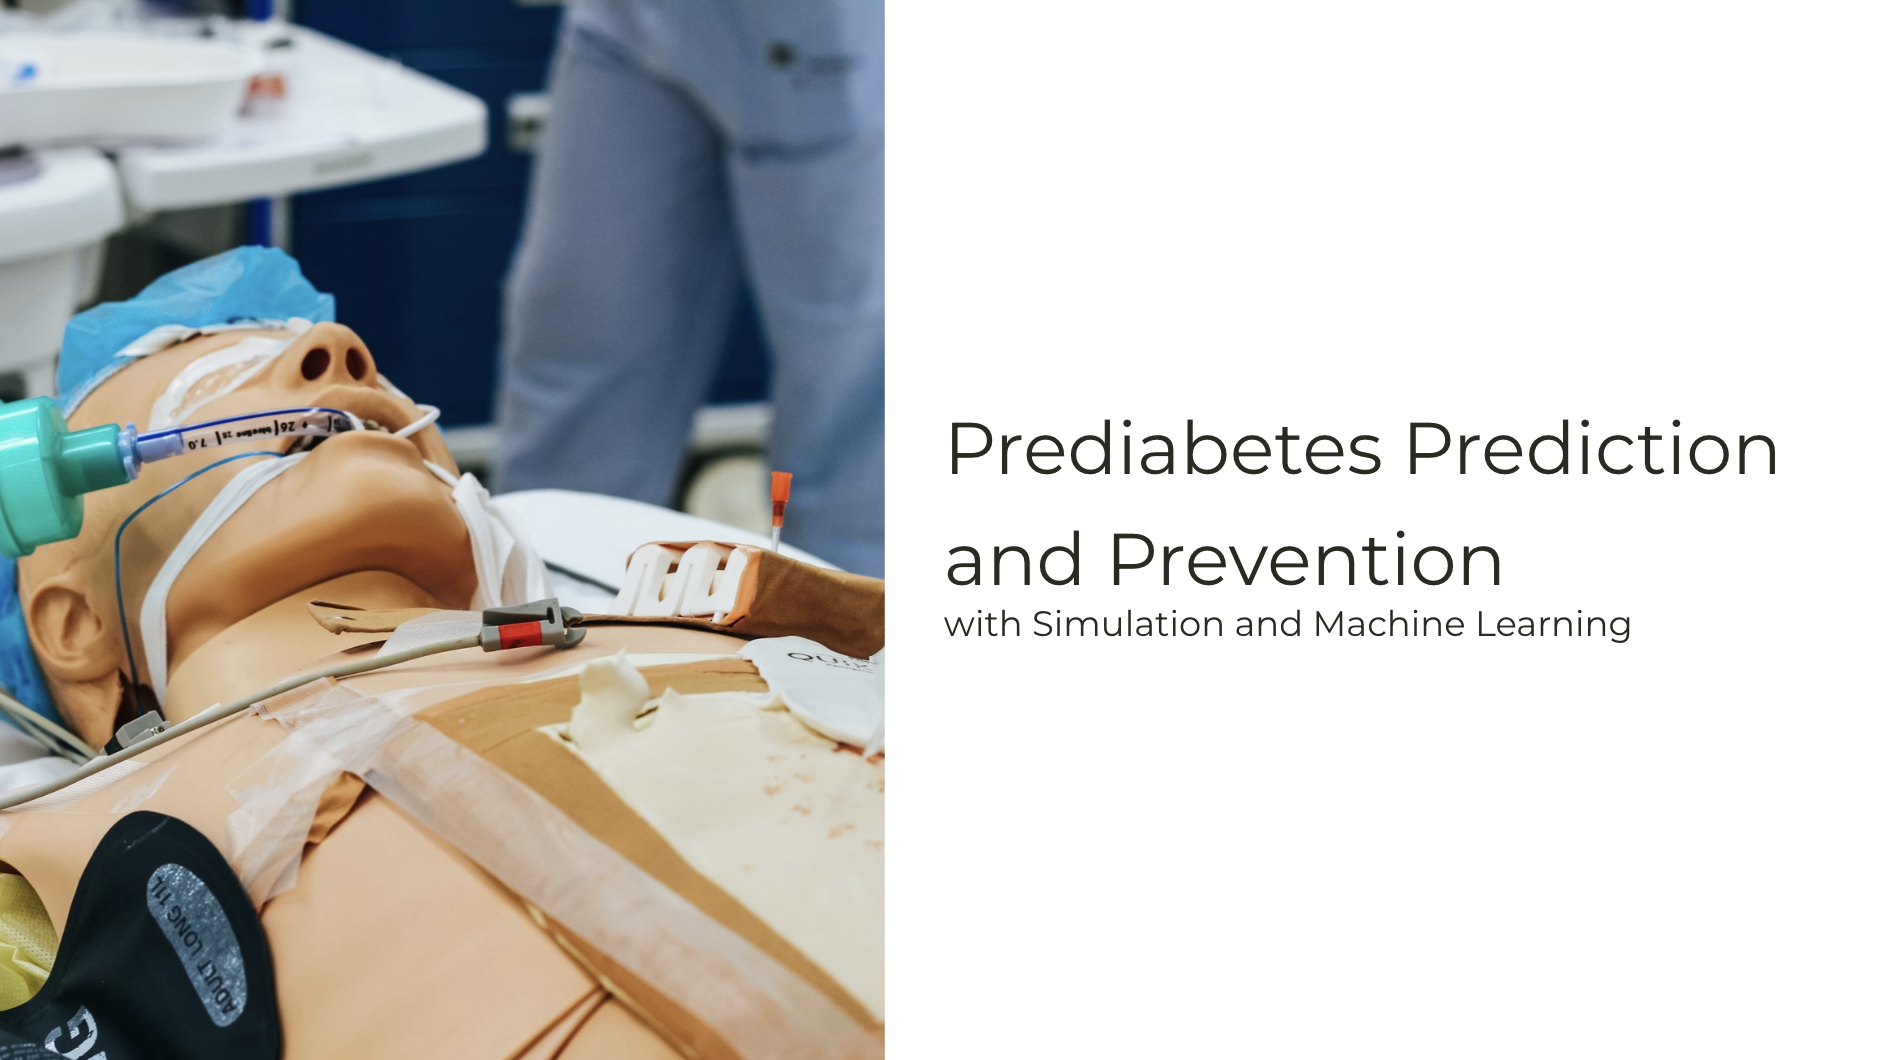 Prediabetes Prediction and Prevention with Simulation and Machine Learning